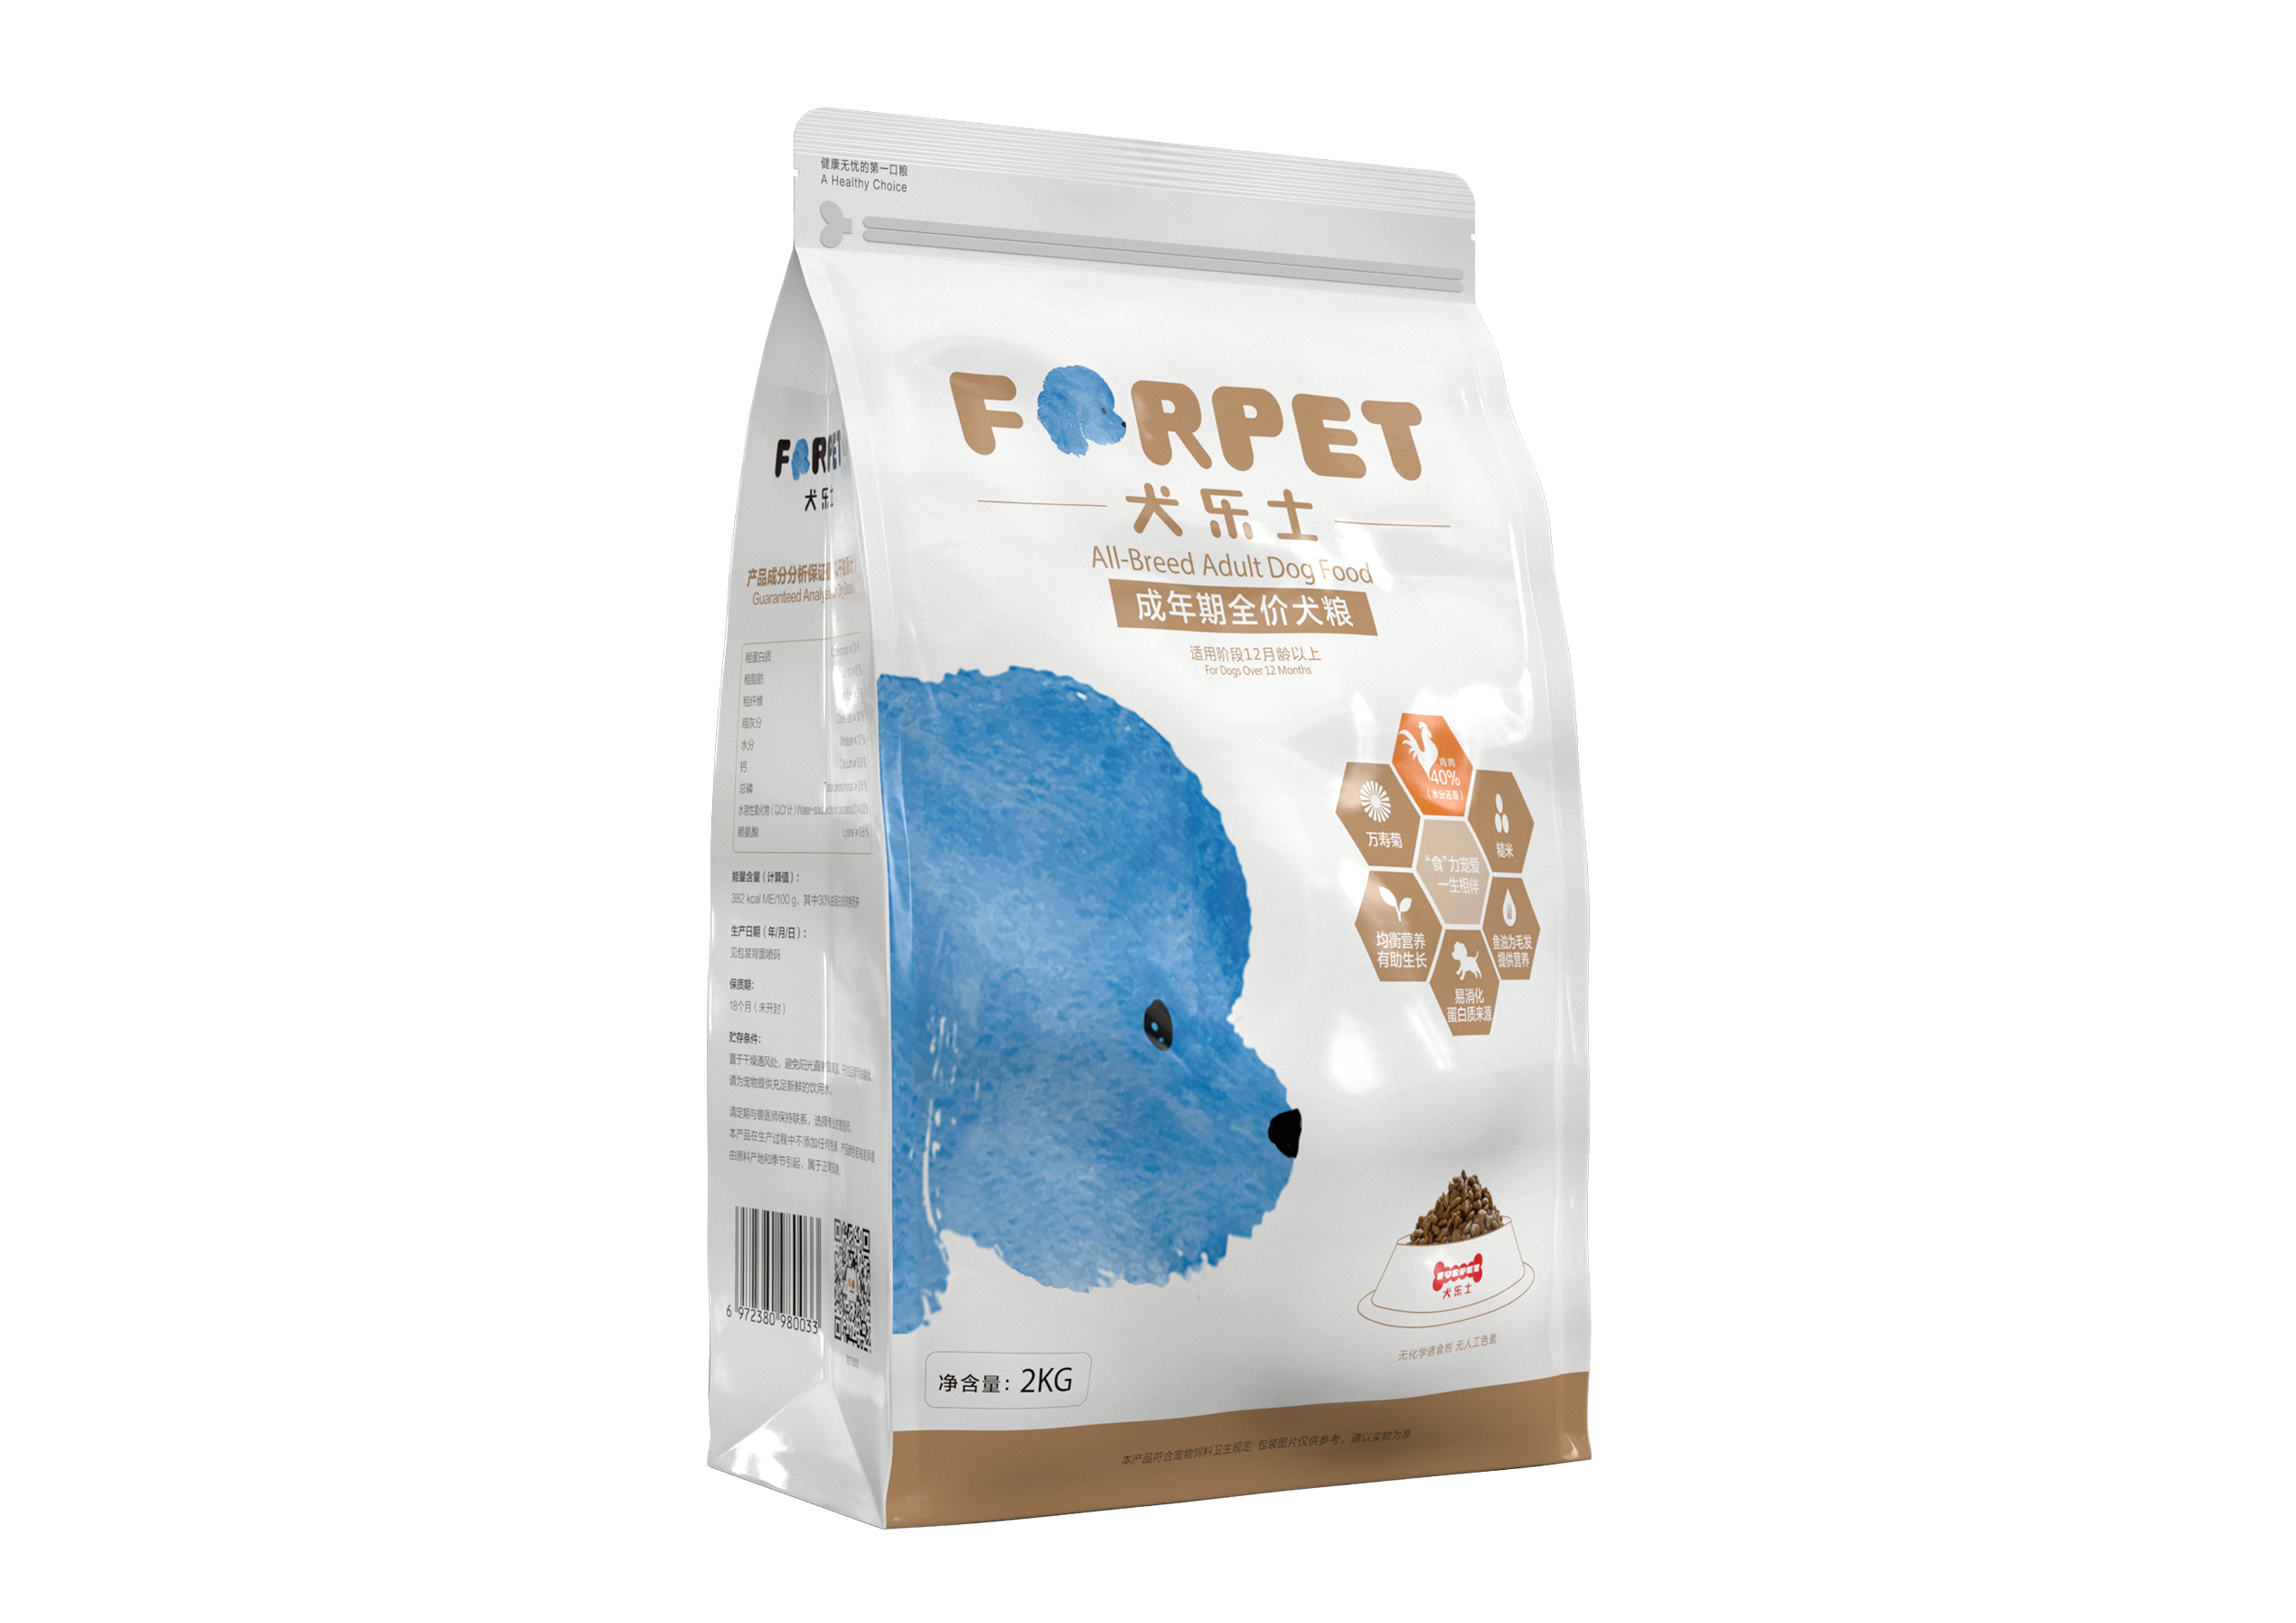 MUSE Design Winners - Forpet Dog Food